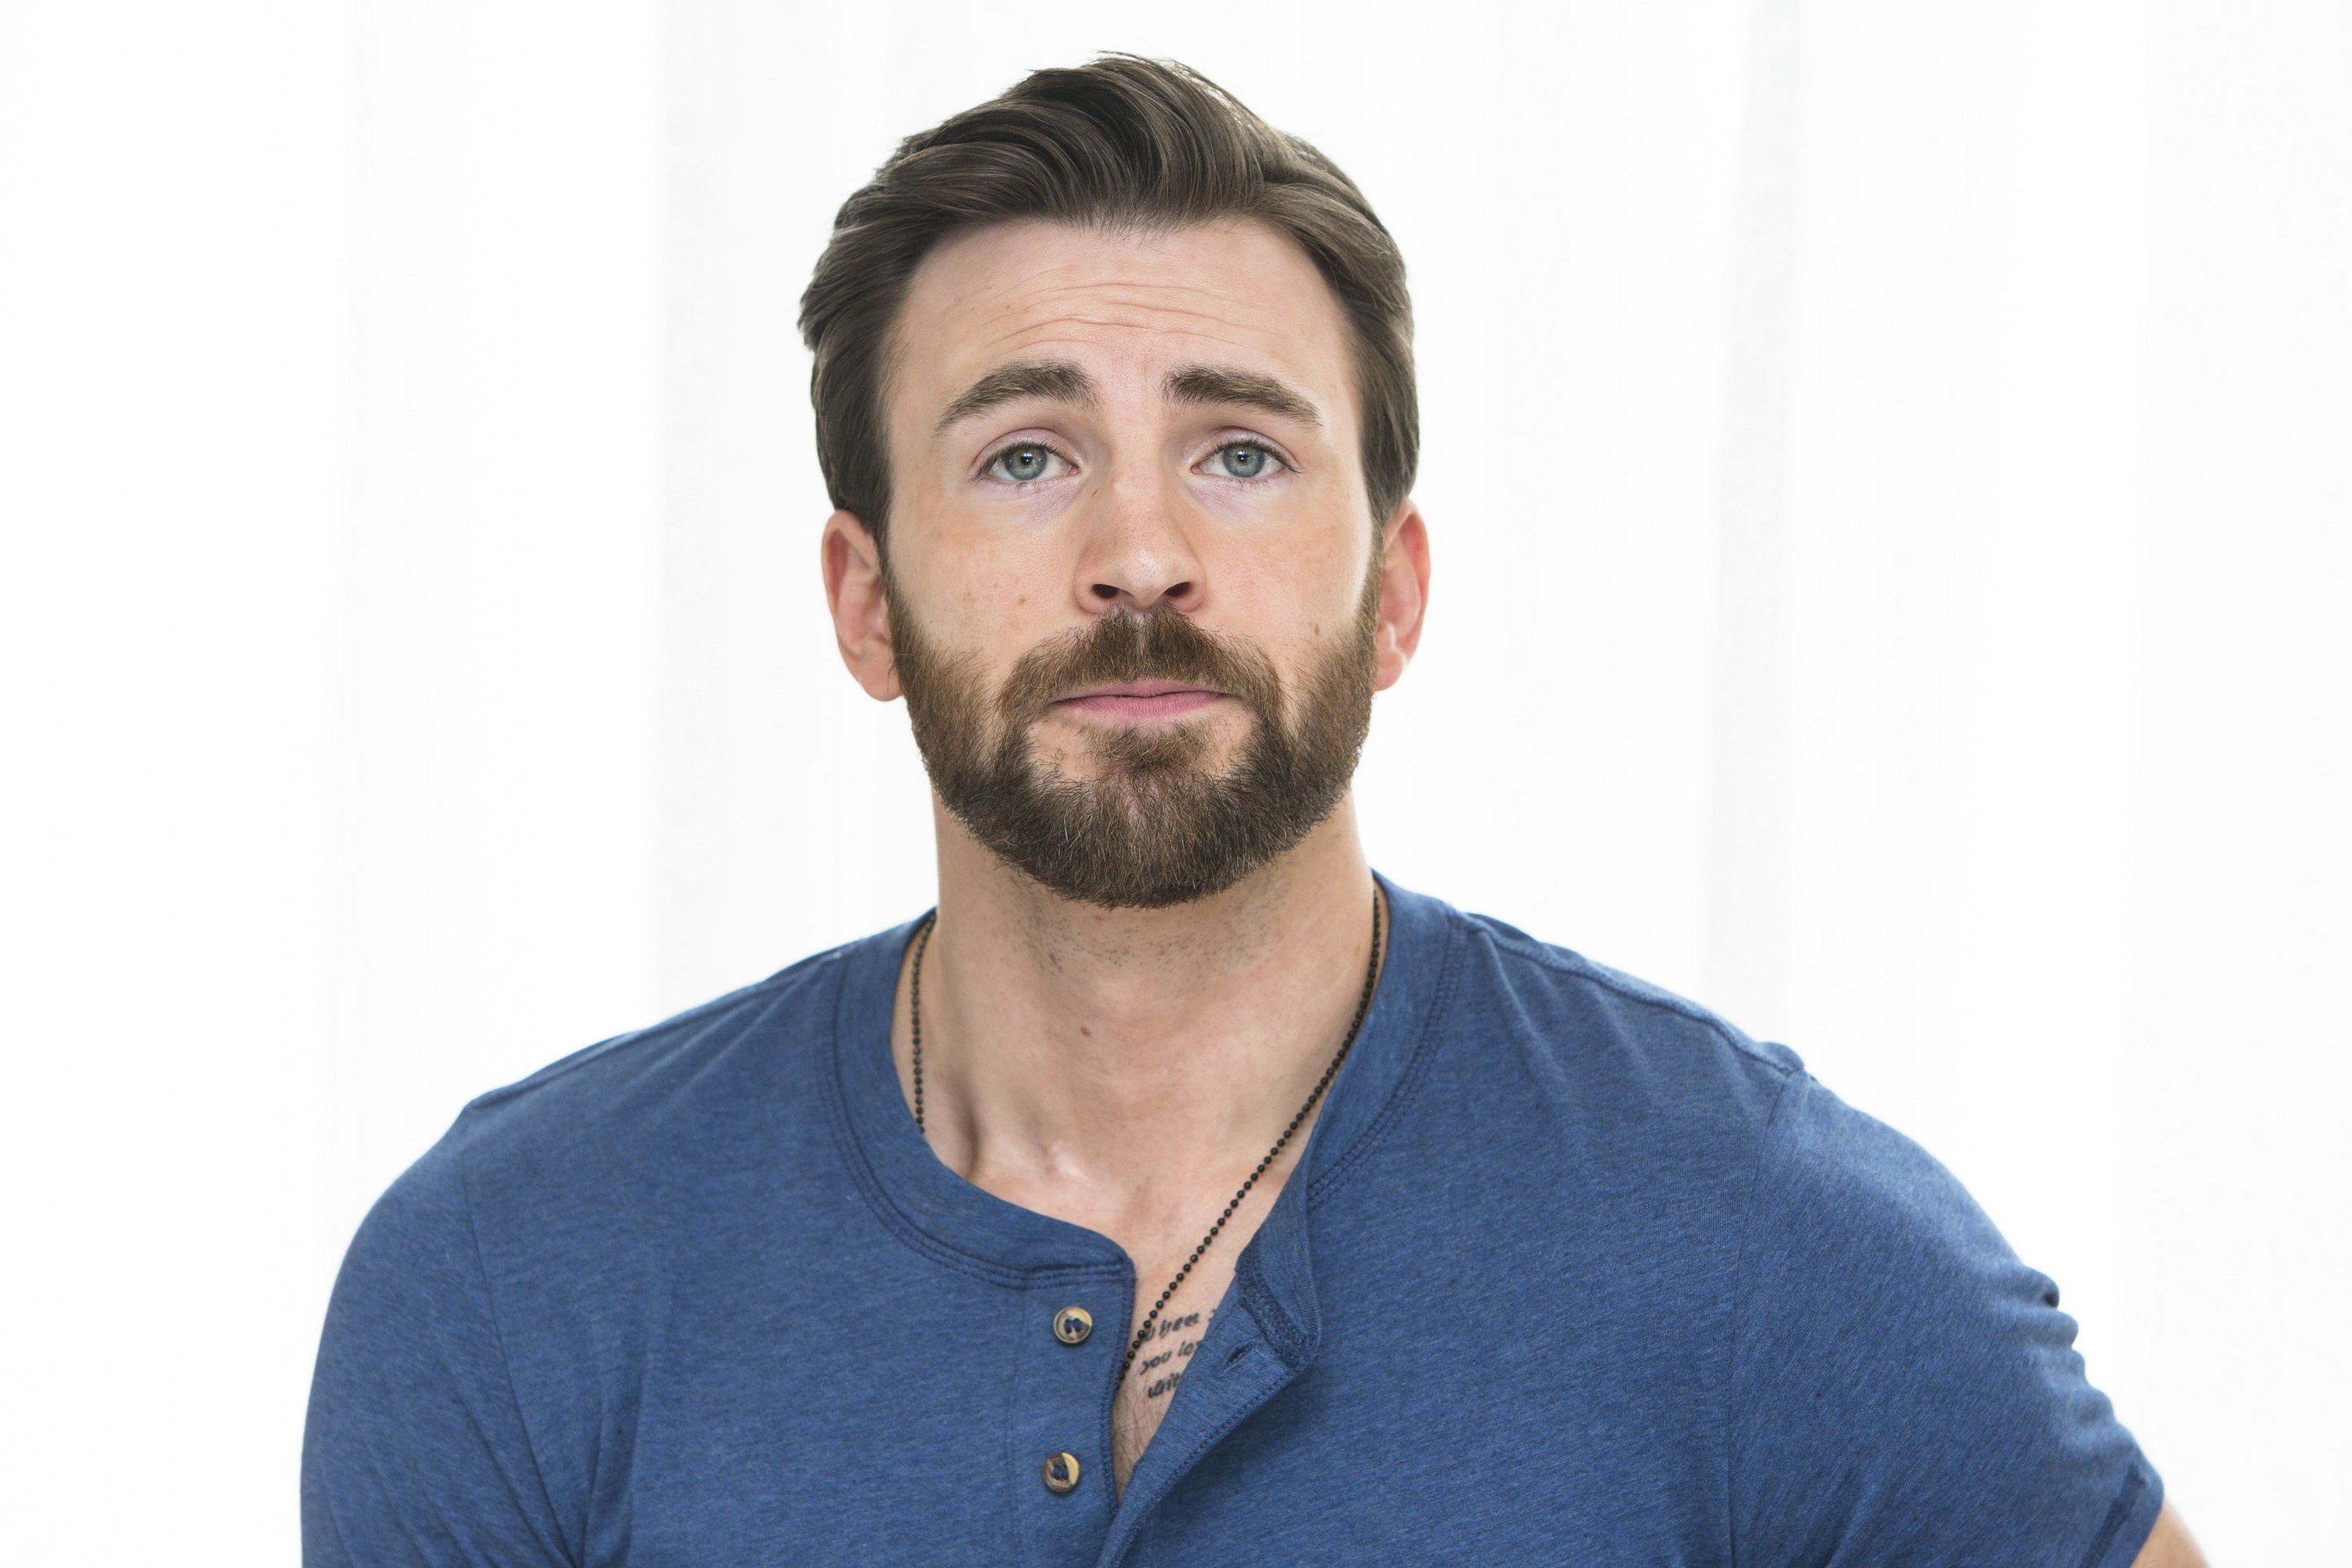 Chris Evans Just Showed Off His Ripped Abs in an Instagram Video